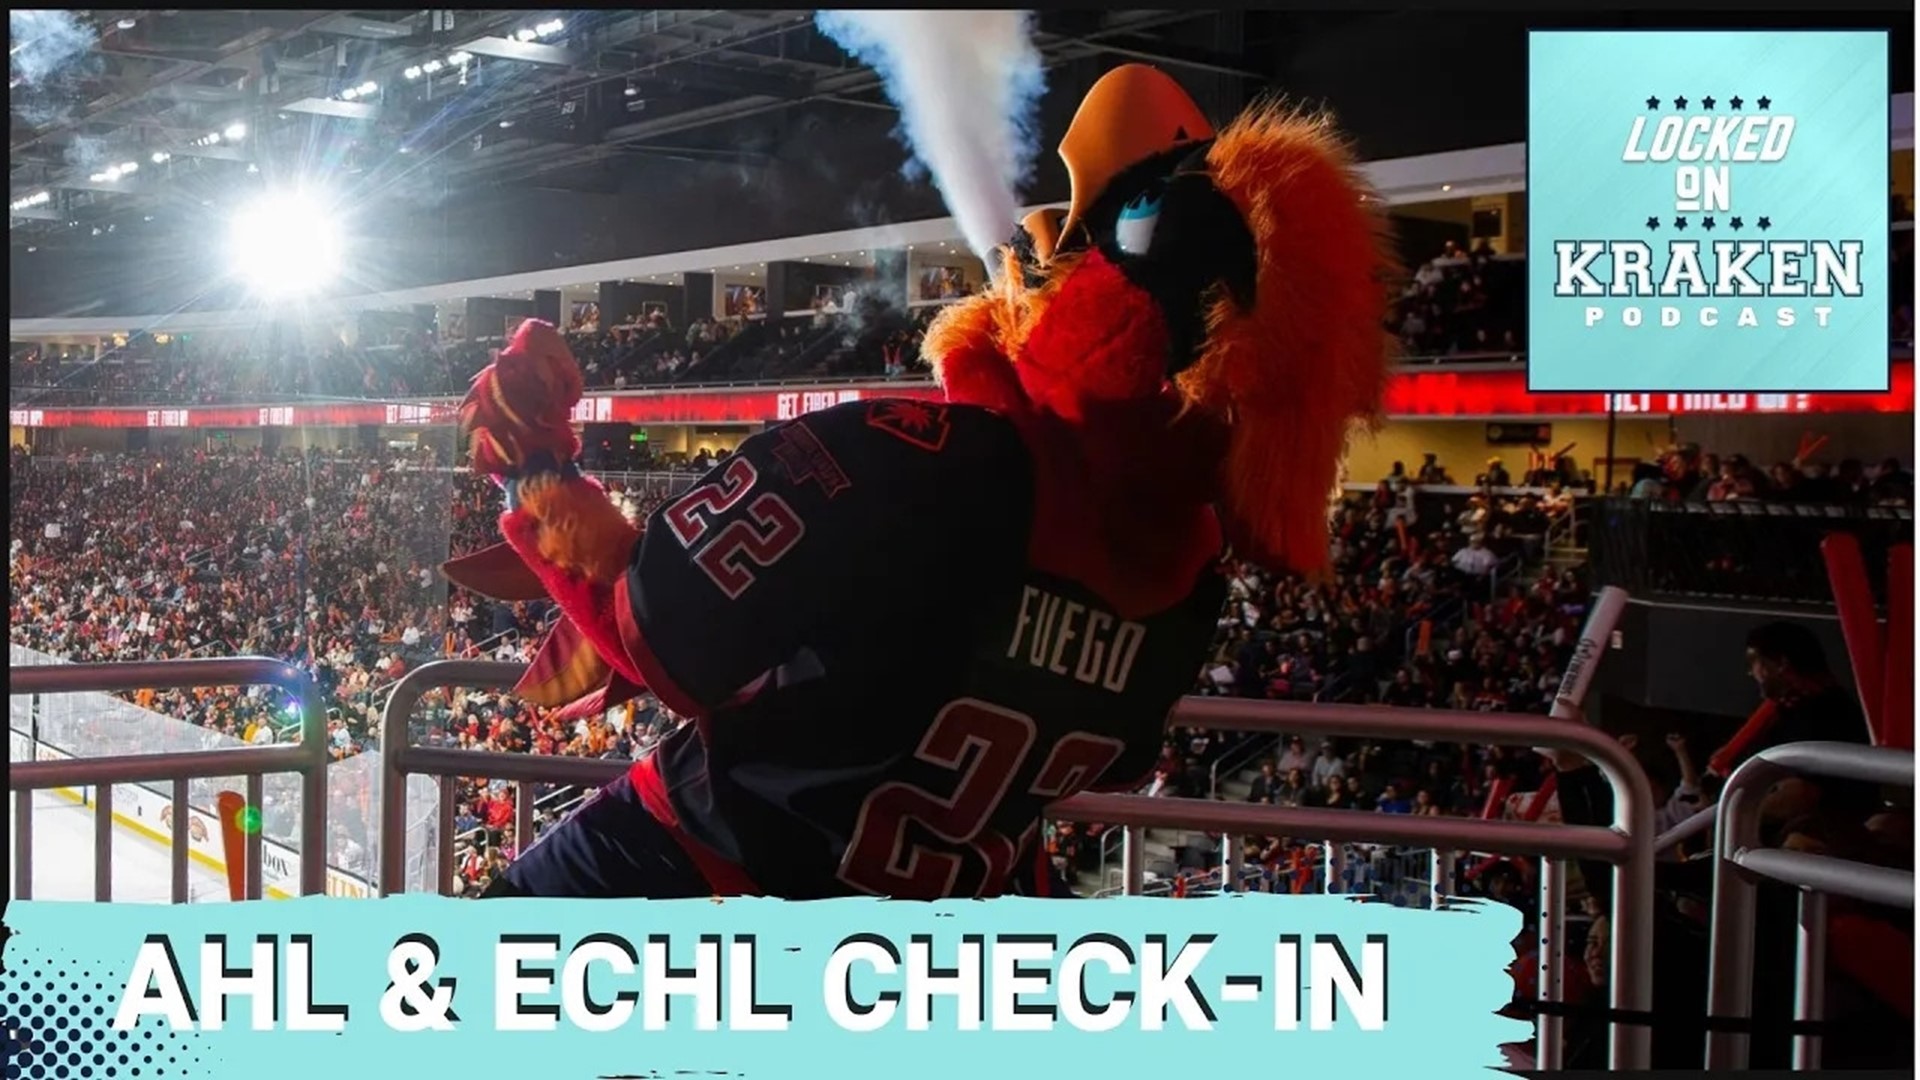 It's Firebird Friday, hockey fans! Well, actually, it's Tuesday, but we're excited to chat about the Seattle Kraken pipeline in the AHL and the ECHL!